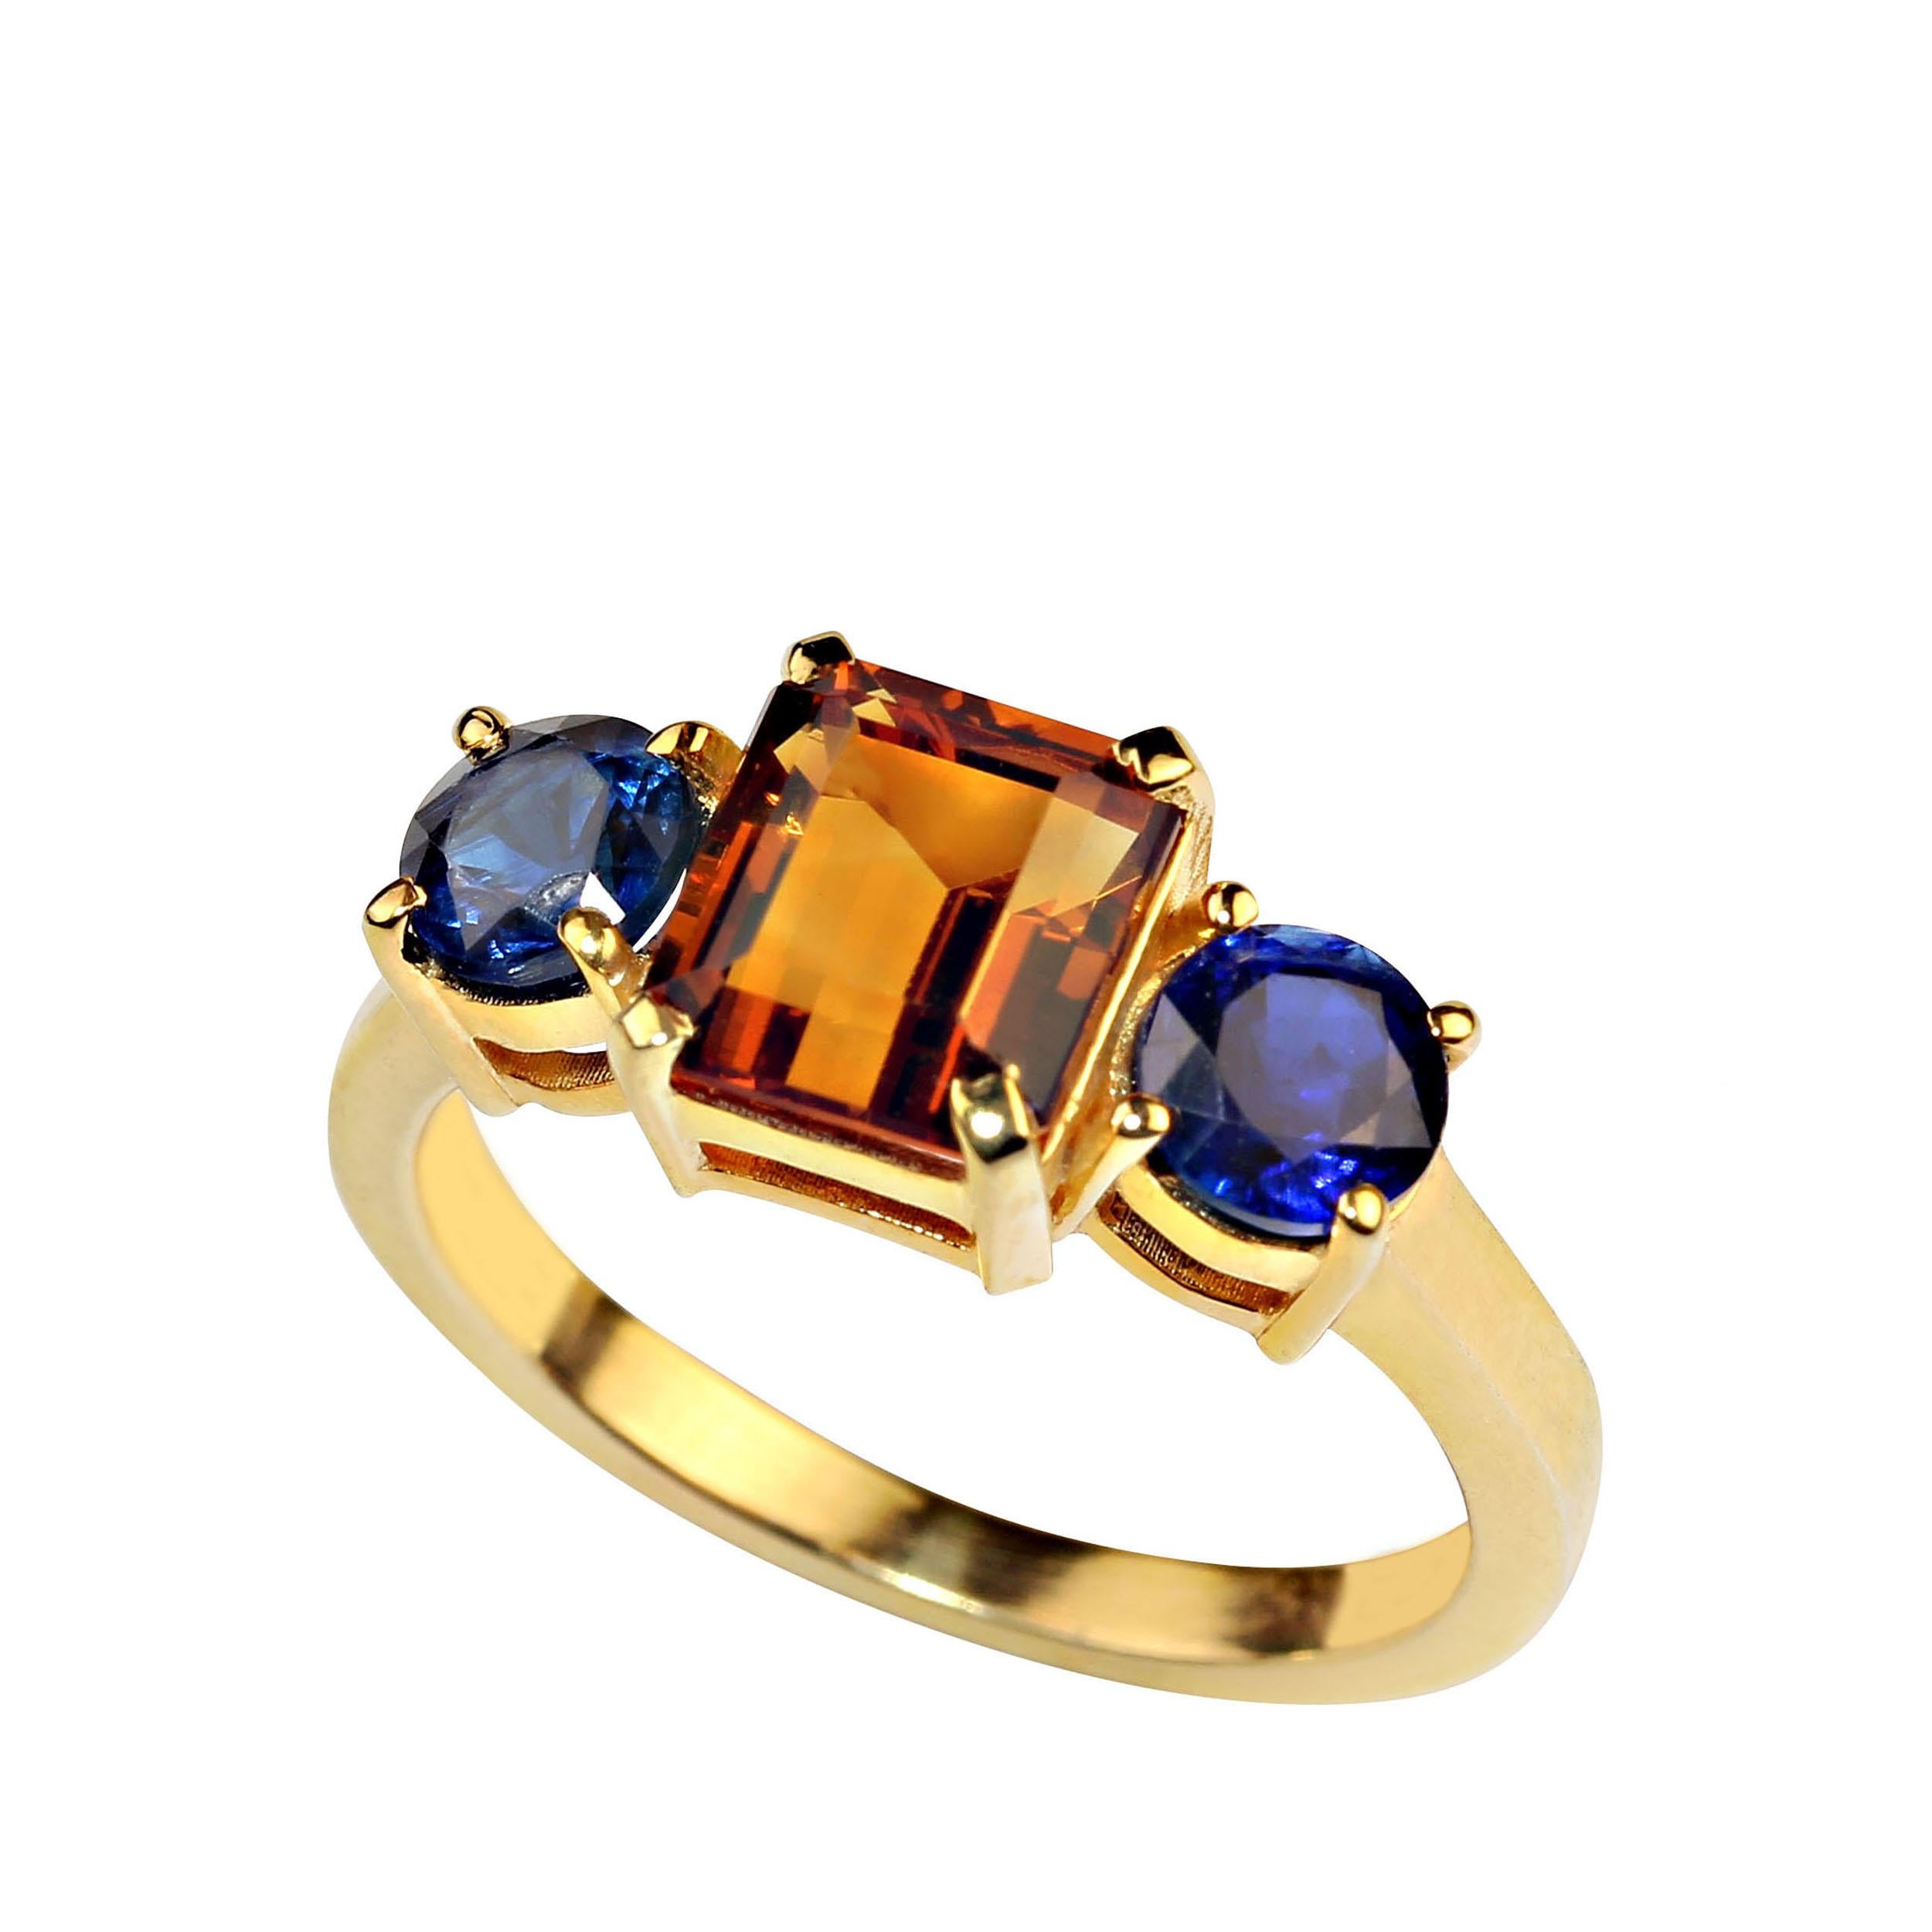 Artisan AJD Elegant Emerald Cut Citrine Accented with Round Blue Kyanite Ring For Sale